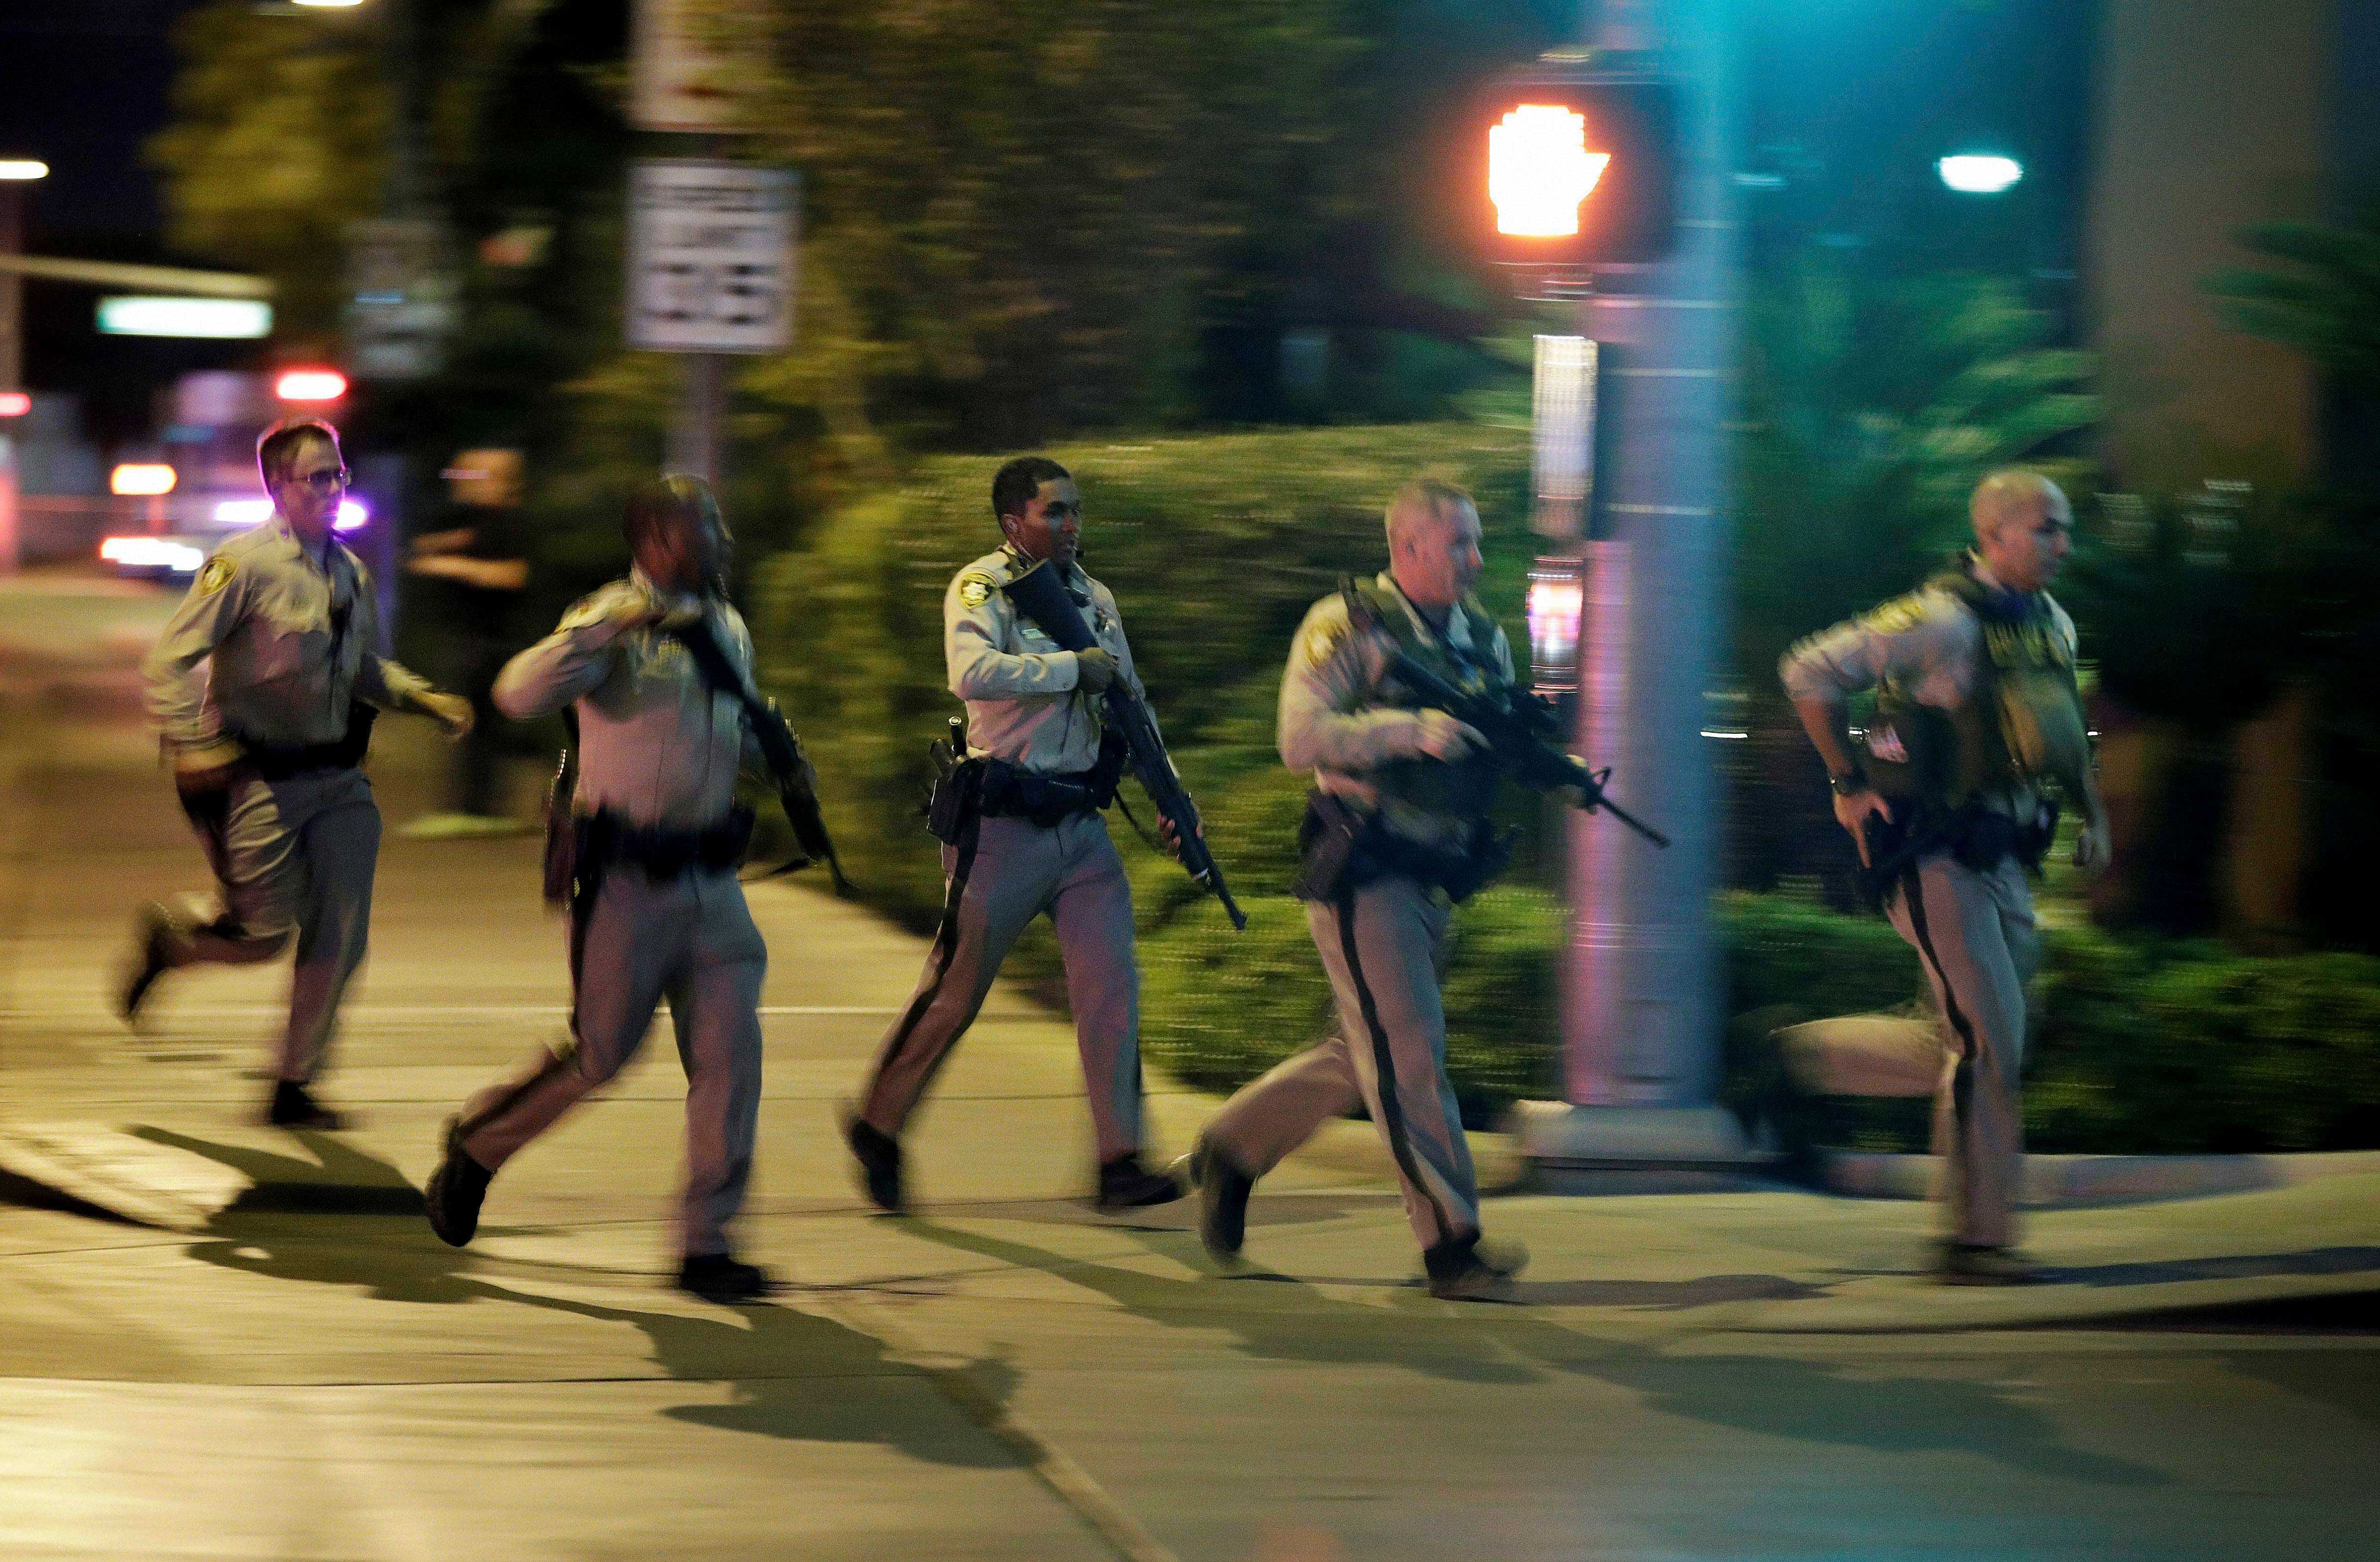 Police run to cover at the scene of a shooting near the Mandalay Bay resort and casino on the Las Vegas Strip, Sunday, Oct. 1, 2017, in Las Vegas. Multiple victims were being transported to hospitals after a shooting late Sunday at a music festival on the Las Vegas Strip. AP/PTI